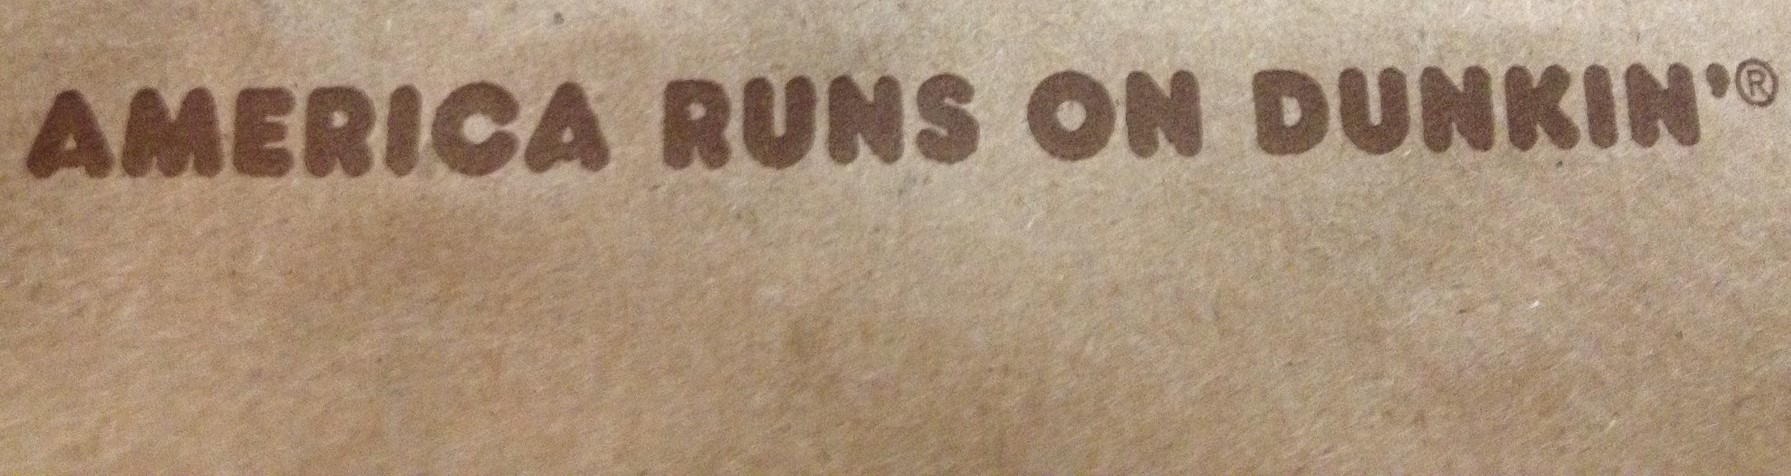 Part of a paper bag that says "America Runs on Dunkin'"